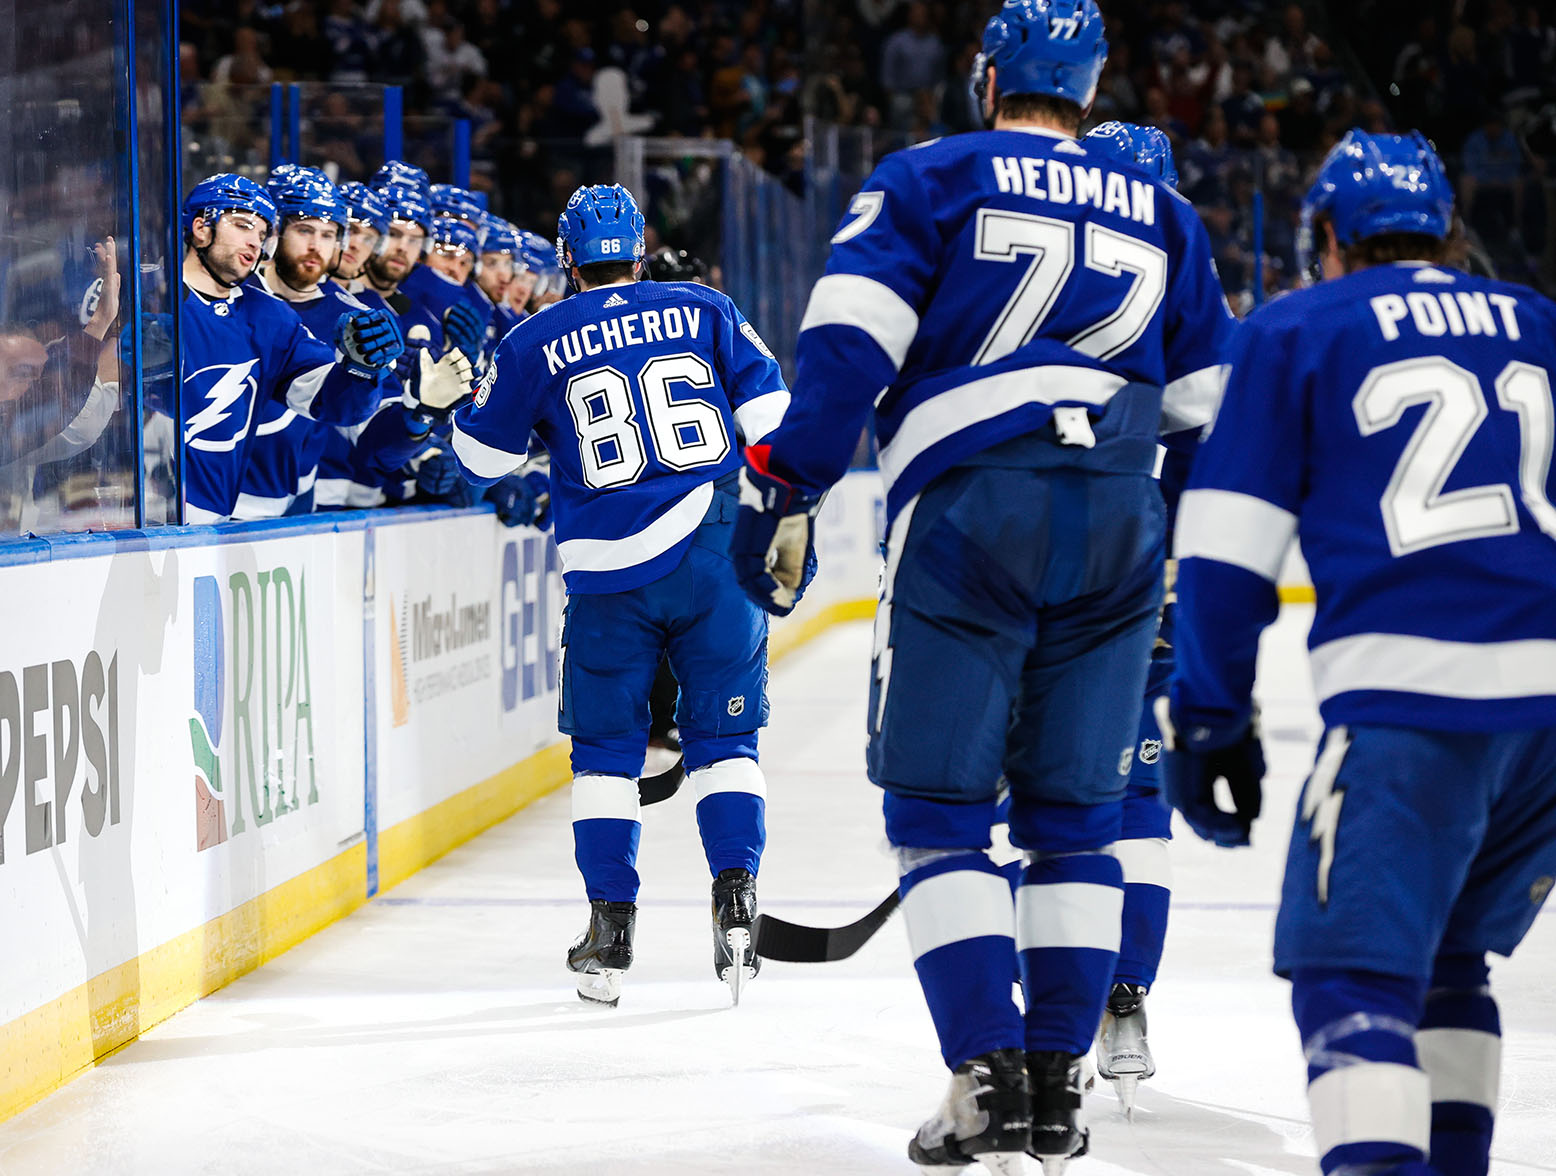 RALEIGH, NC - JANUARY 25: Nikita Kucherov #86 of the Tampa Bay Lightning scores a goal during the second period of the game against the Arizona Coyotes at Amalie Arena on January 25, 2024 in Tampa, Florida. (Photo by Jaylynn Nash/Getty Images)